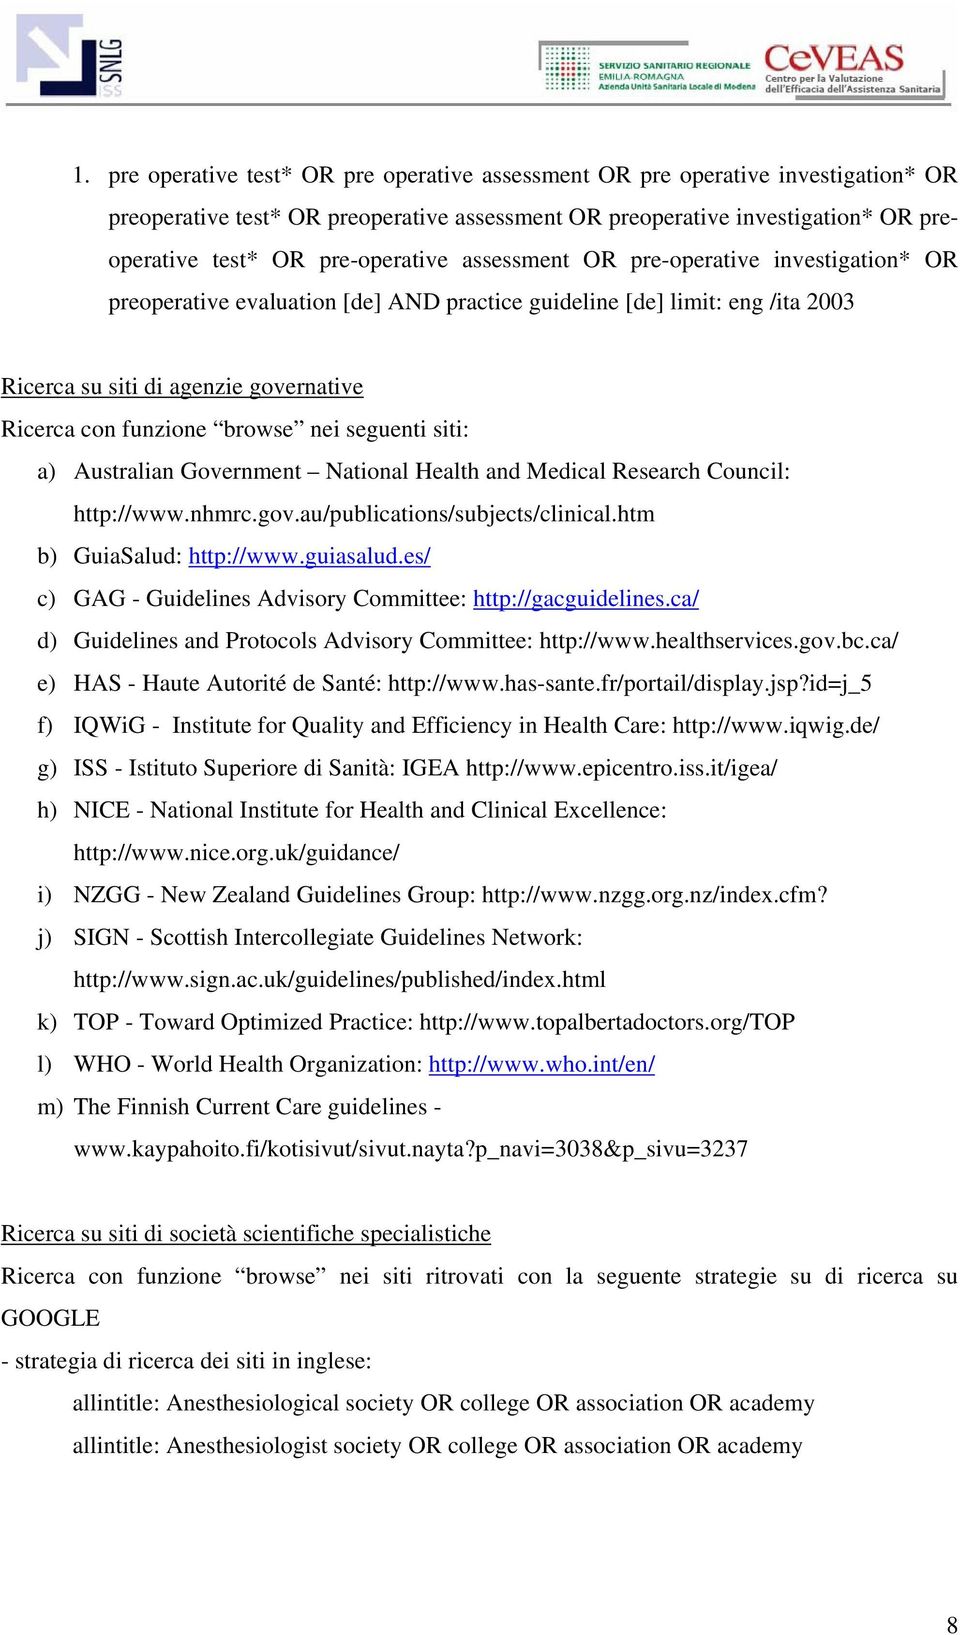 browse nei seguenti siti: a) Australian Government National Health and Medical Research Council: http://www.nhmrc.gov.au/publications/subjects/clinical.htm b) GuiaSalud: http://www.guiasalud.